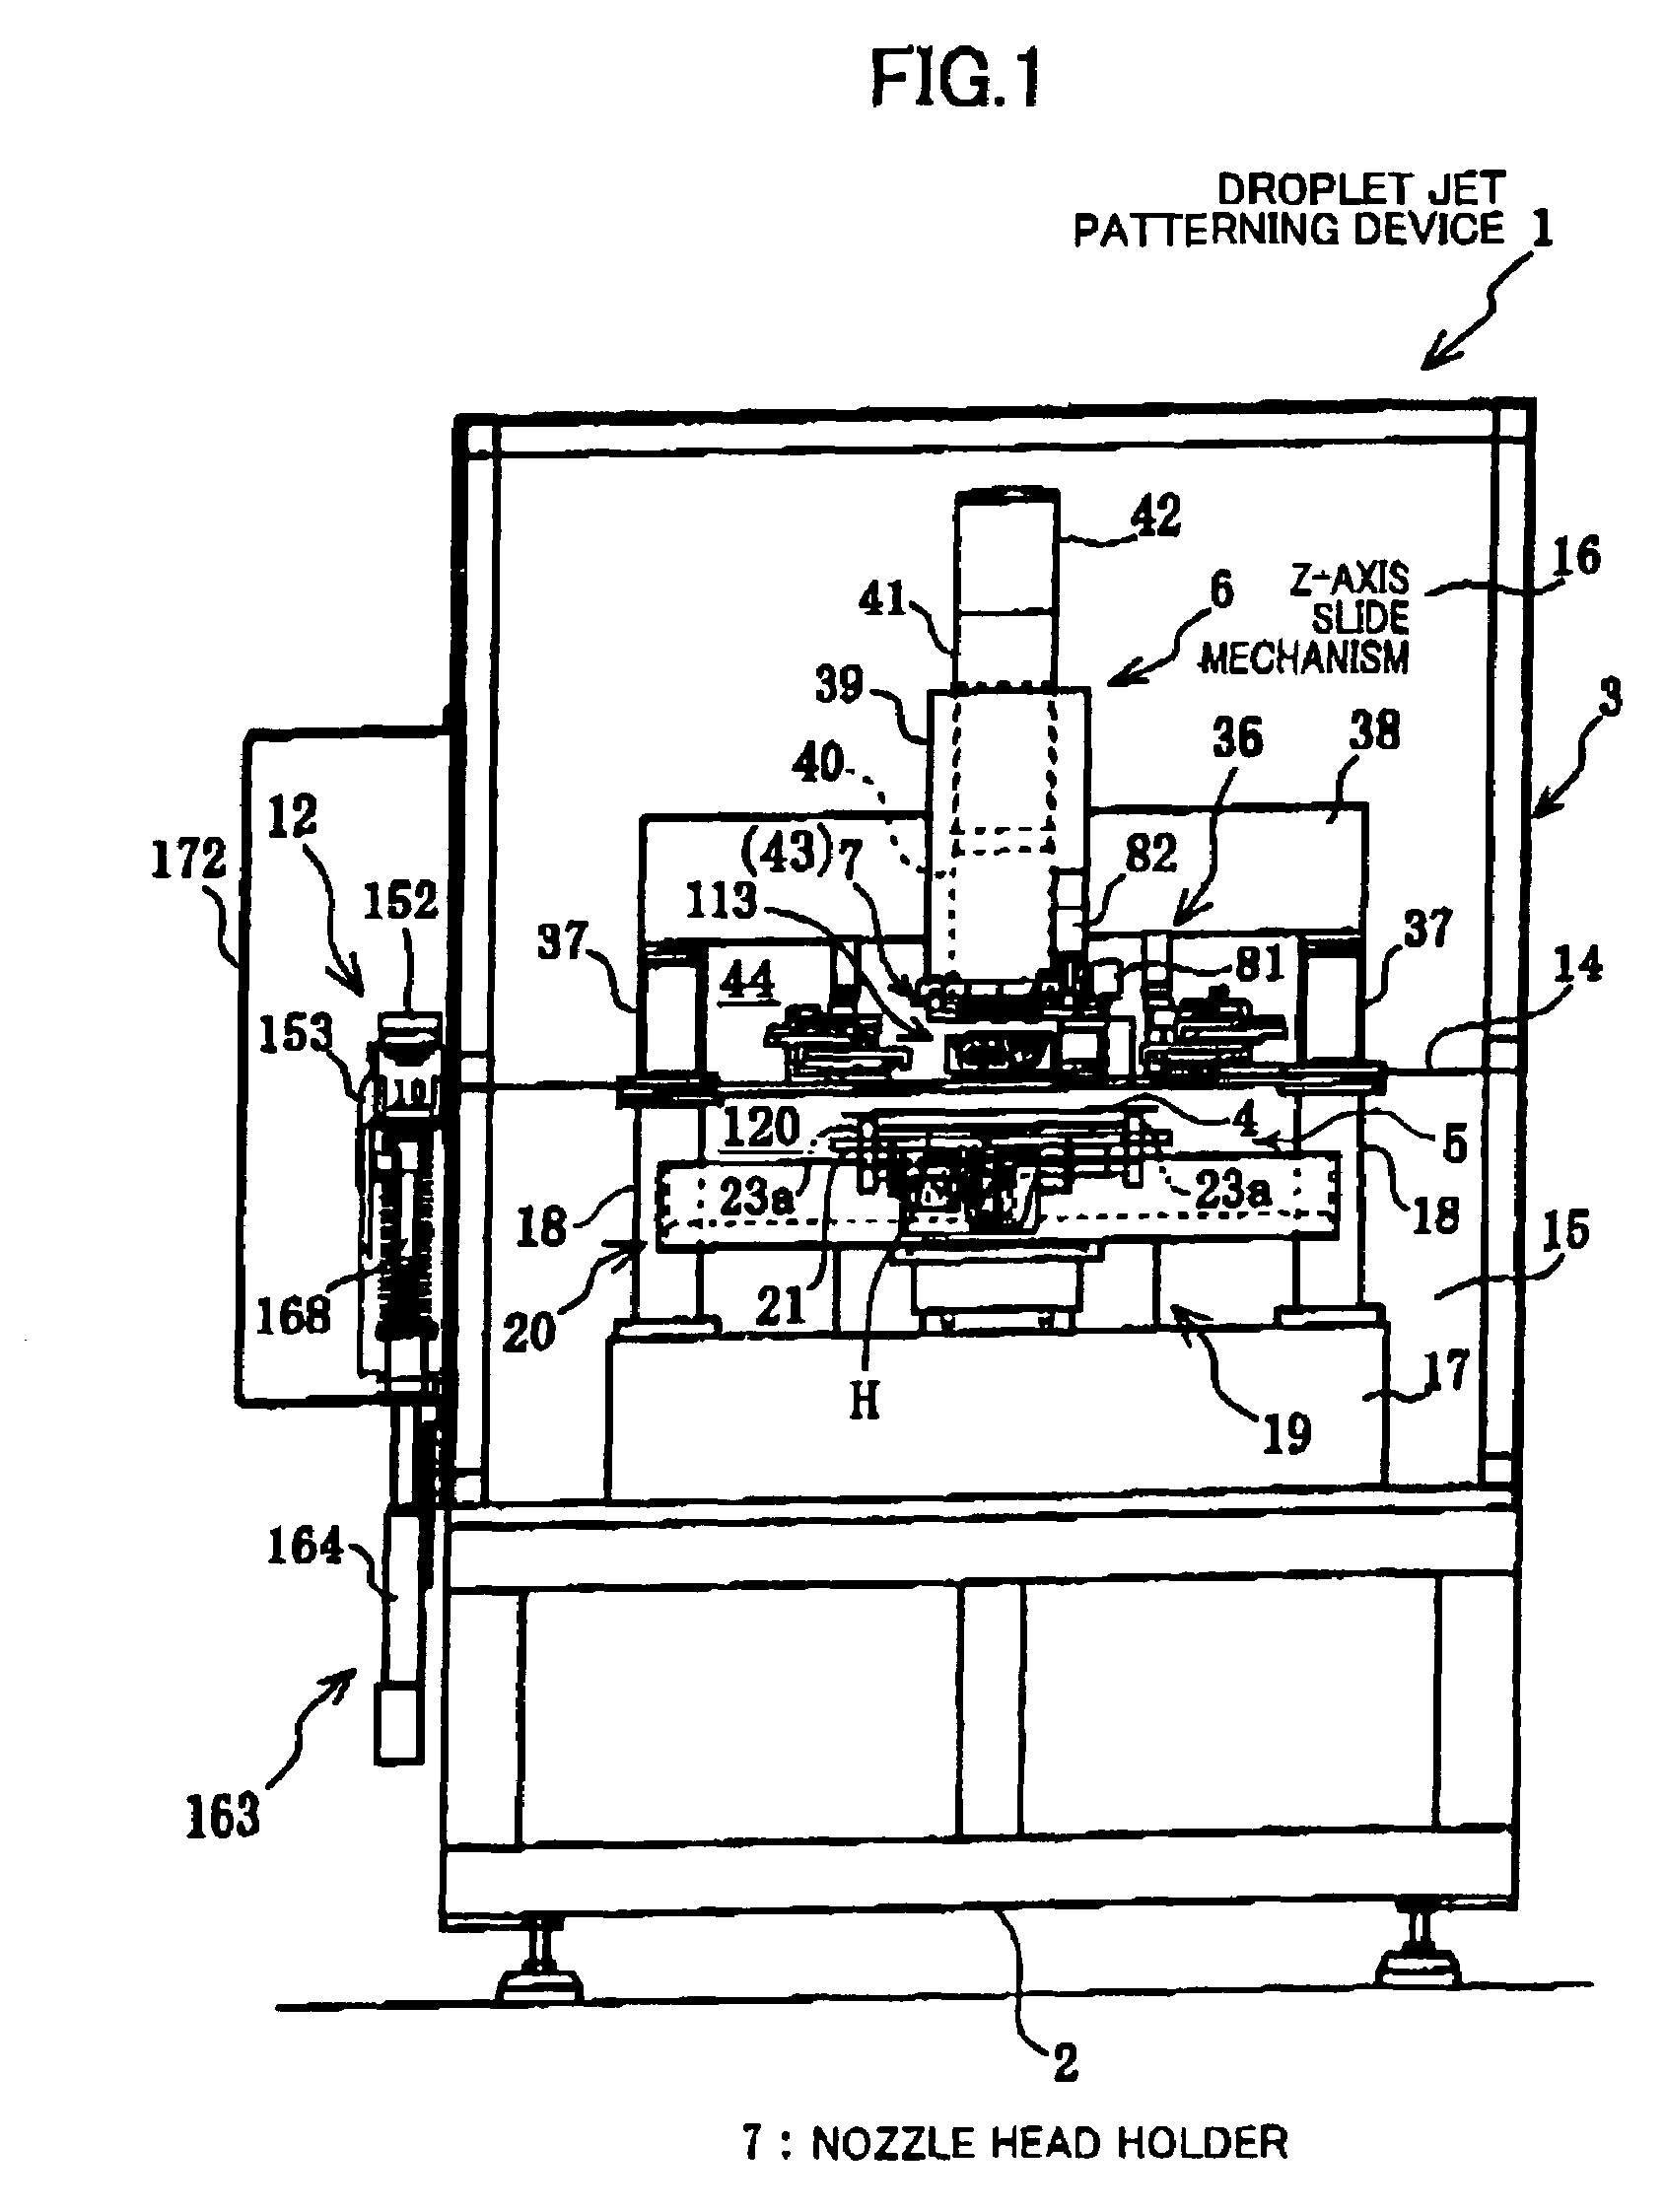 Nozzle head, nozzle head holder, and droplet jet patterning device